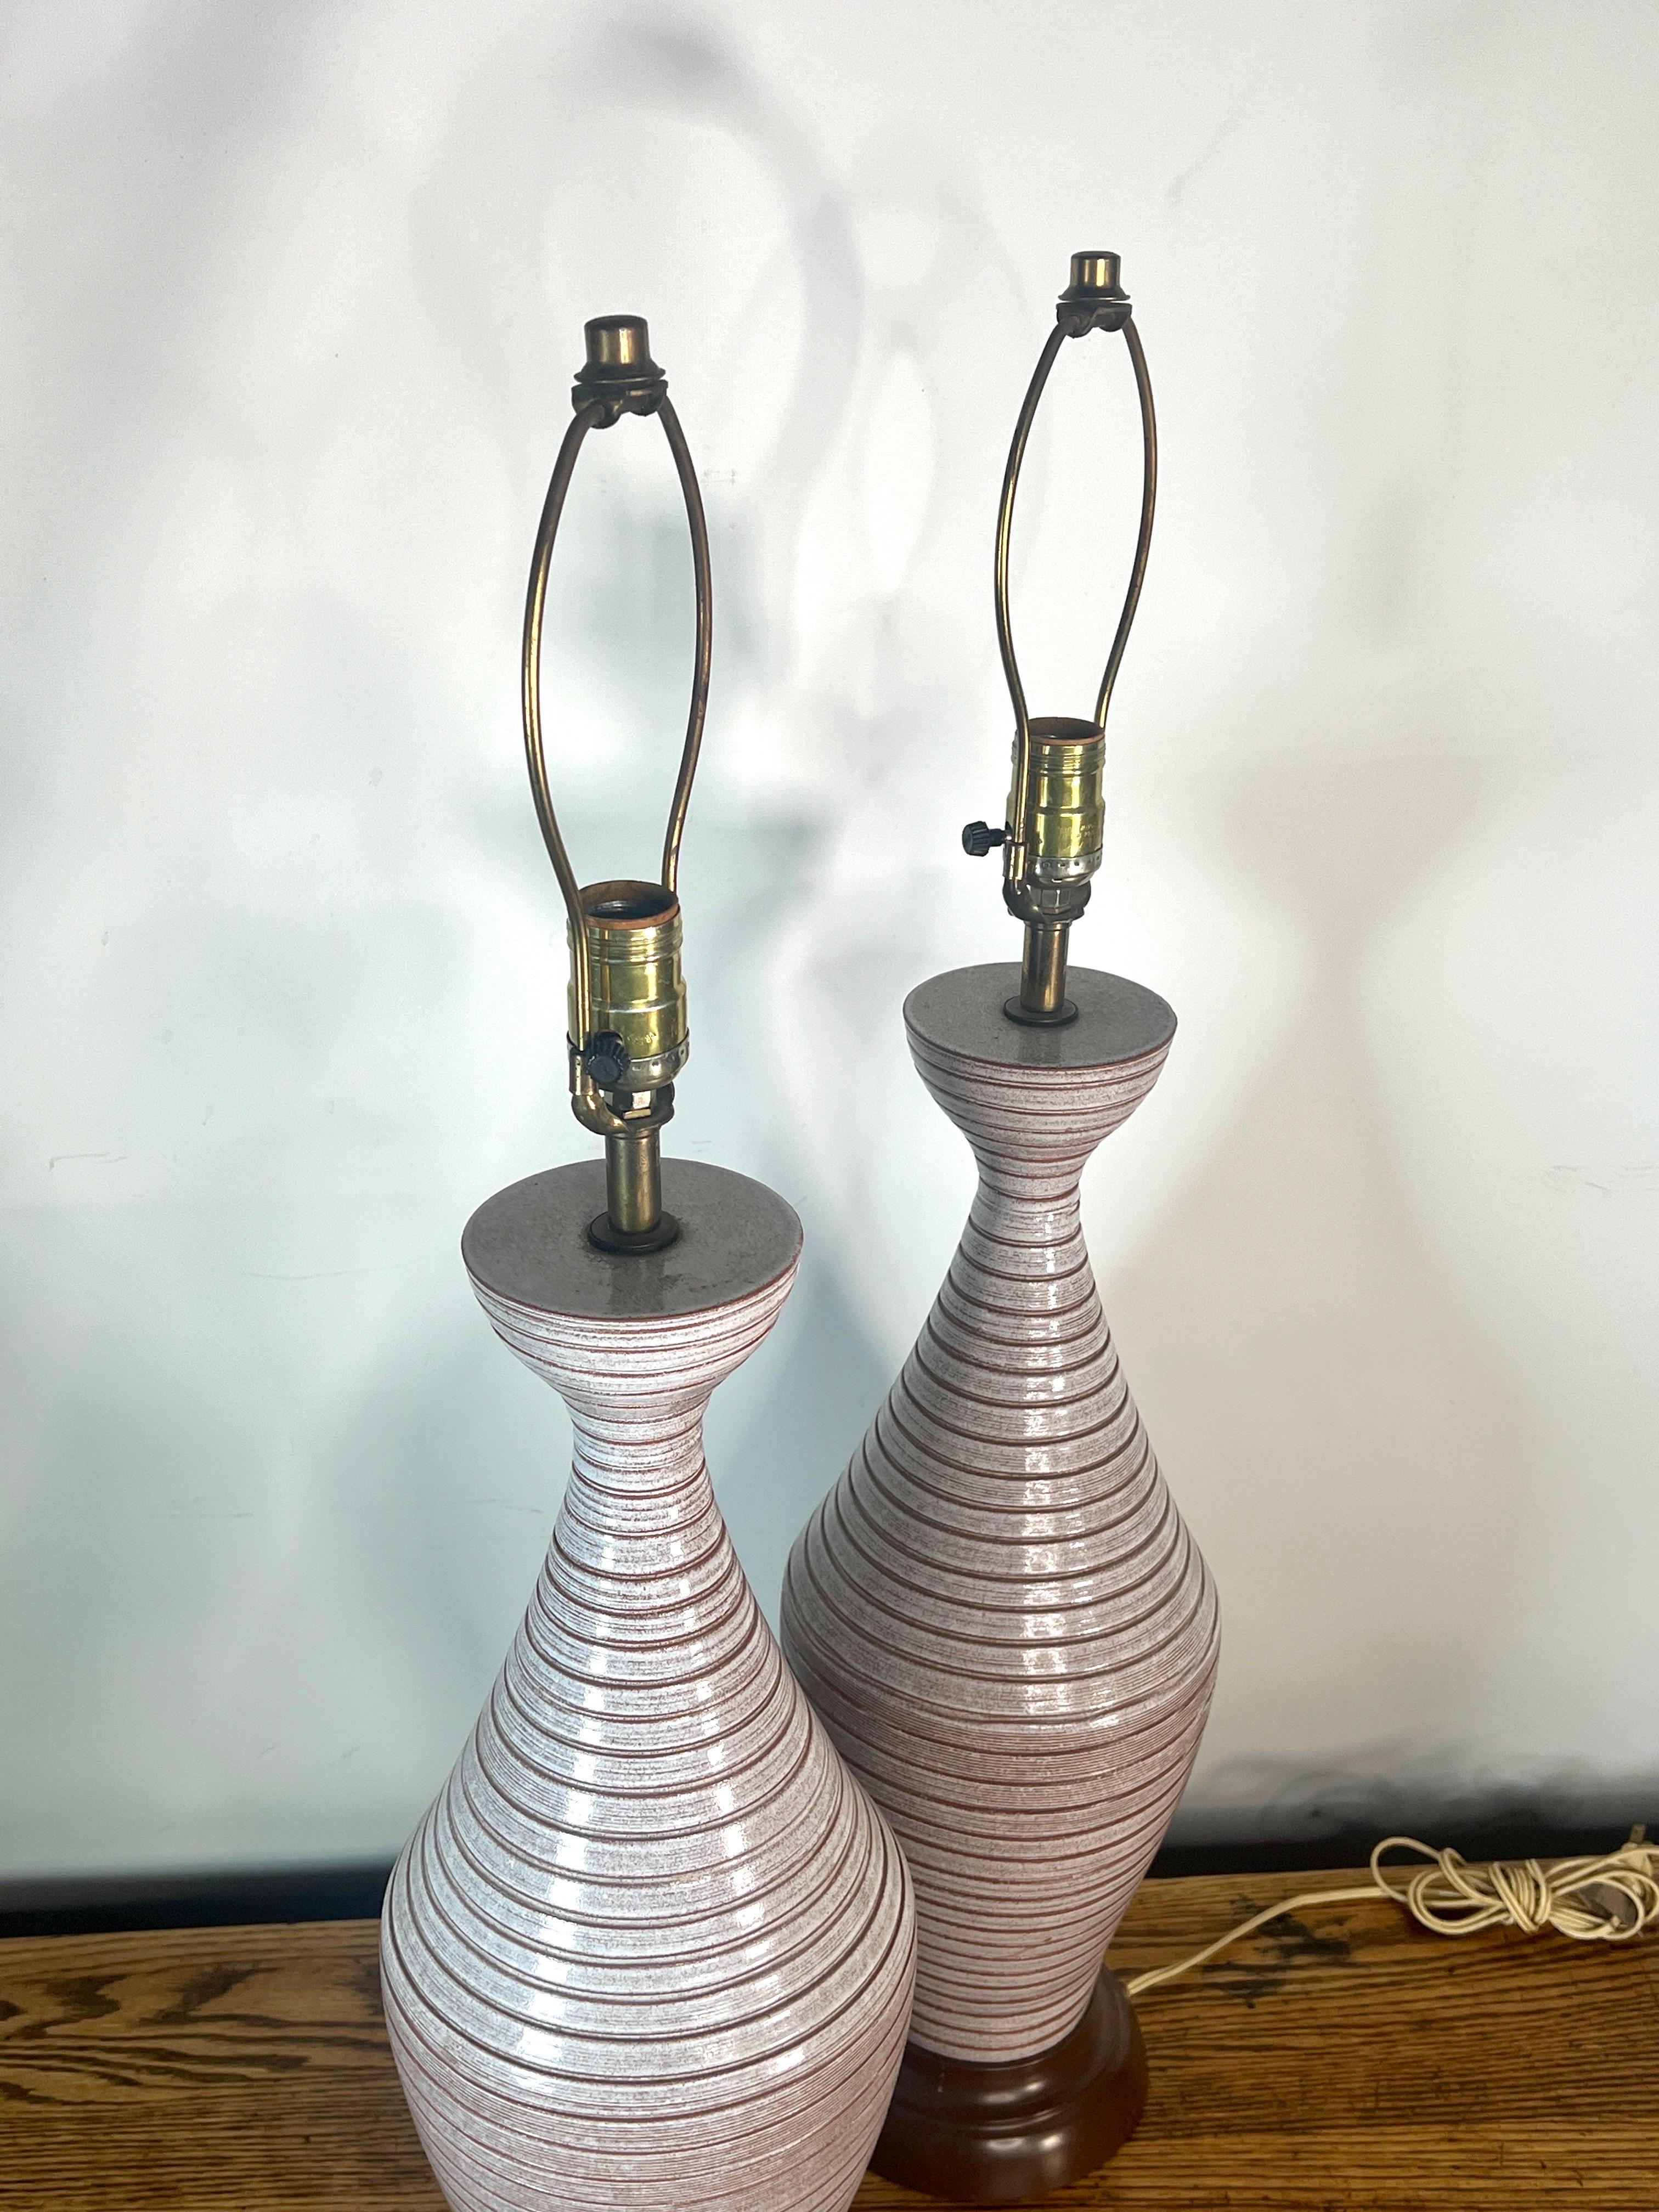 For sale is this stunning pair of two large table lamps that are made out of ceramic with metal bases.